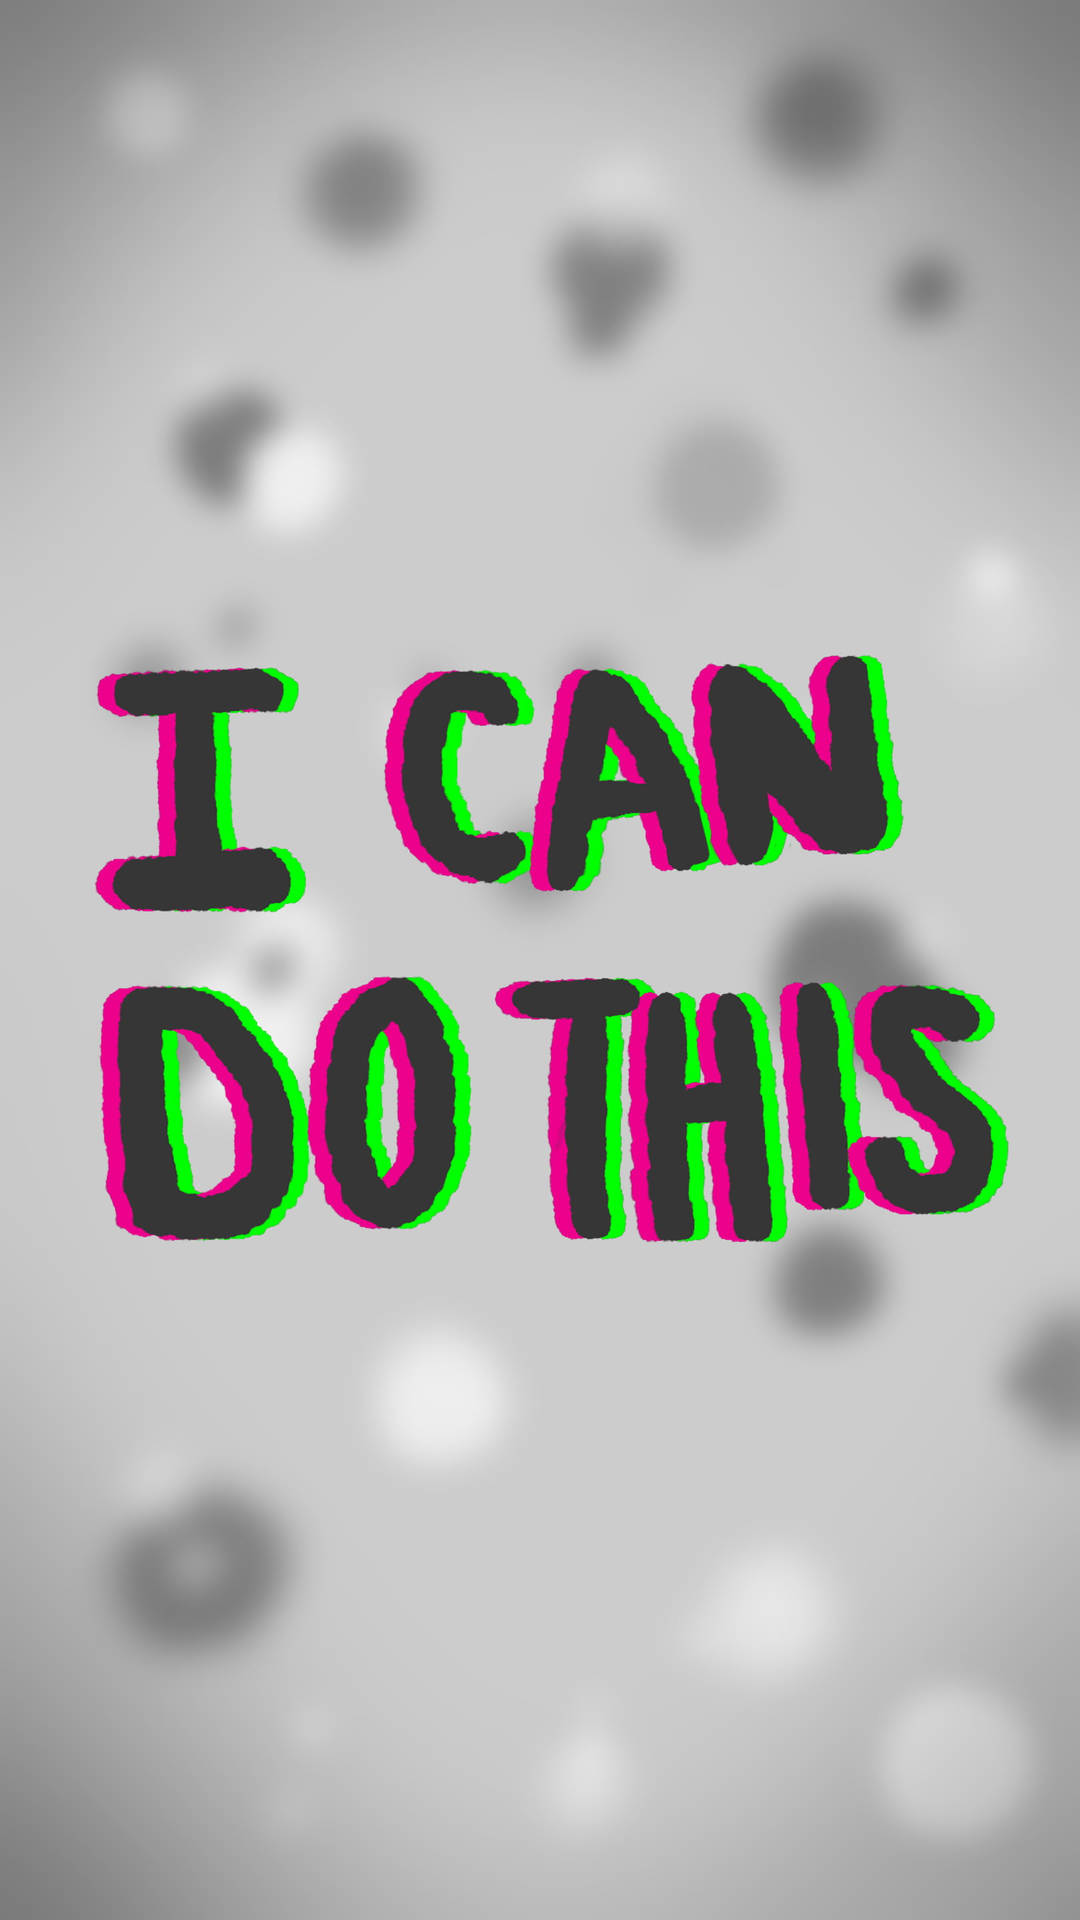 I Can Do This Affirmation Wallpaper